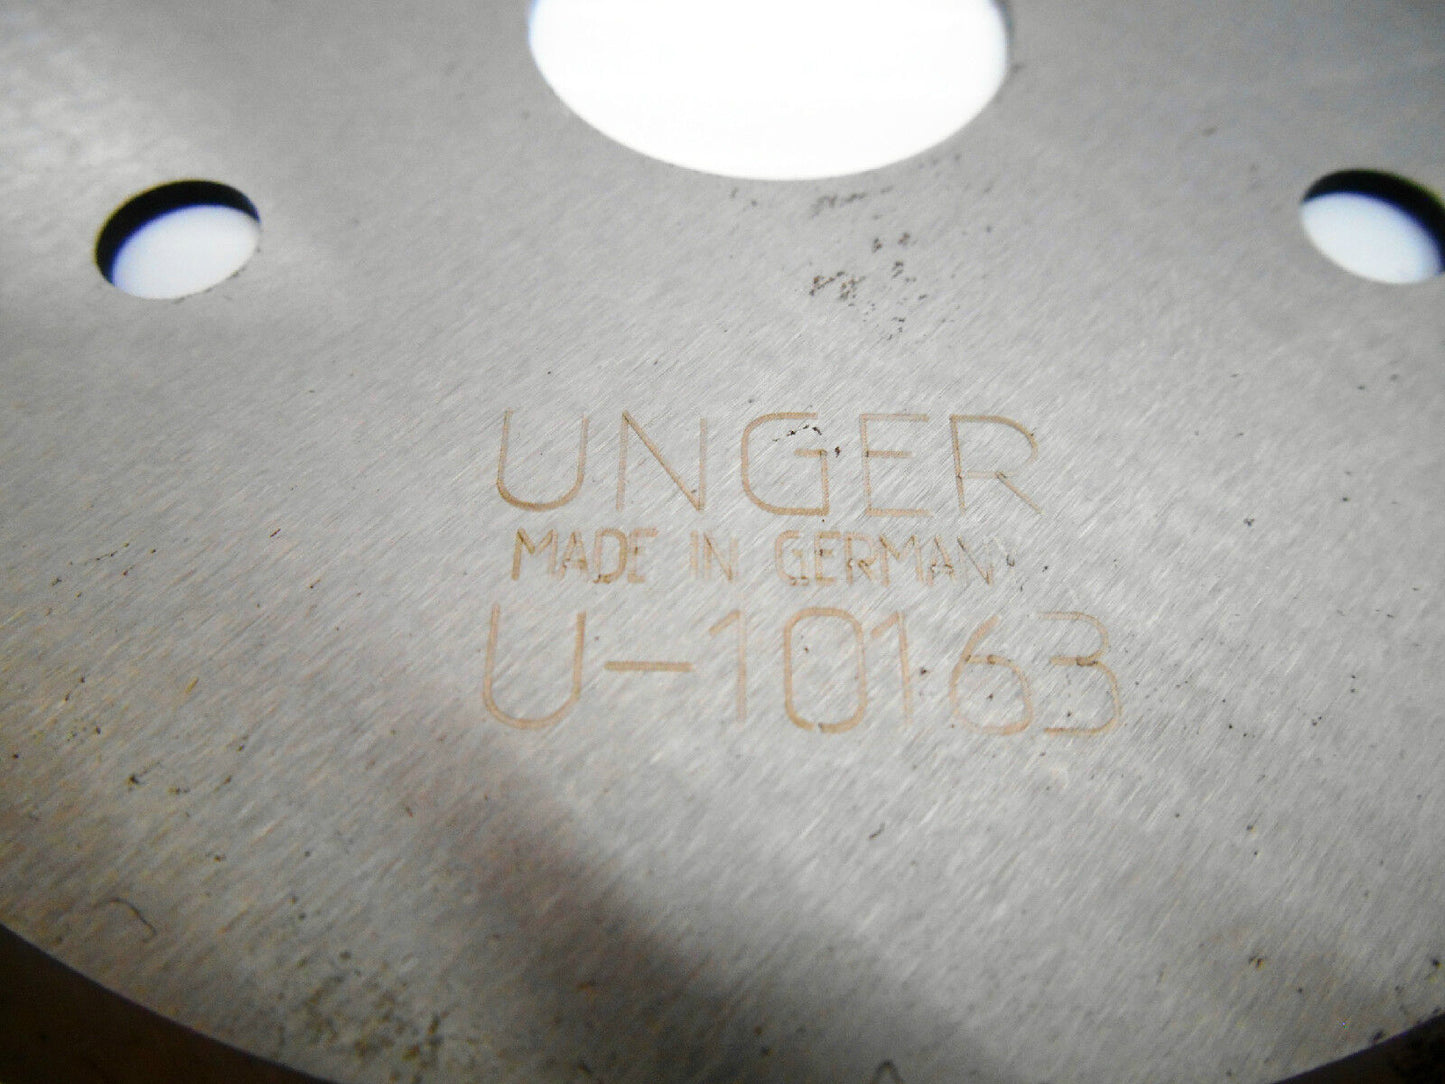 UNGER U-10163 CIRCULAR CUTTER 3 HOLE 4-3/8" D 1" BORE - NEW OLD STOCK